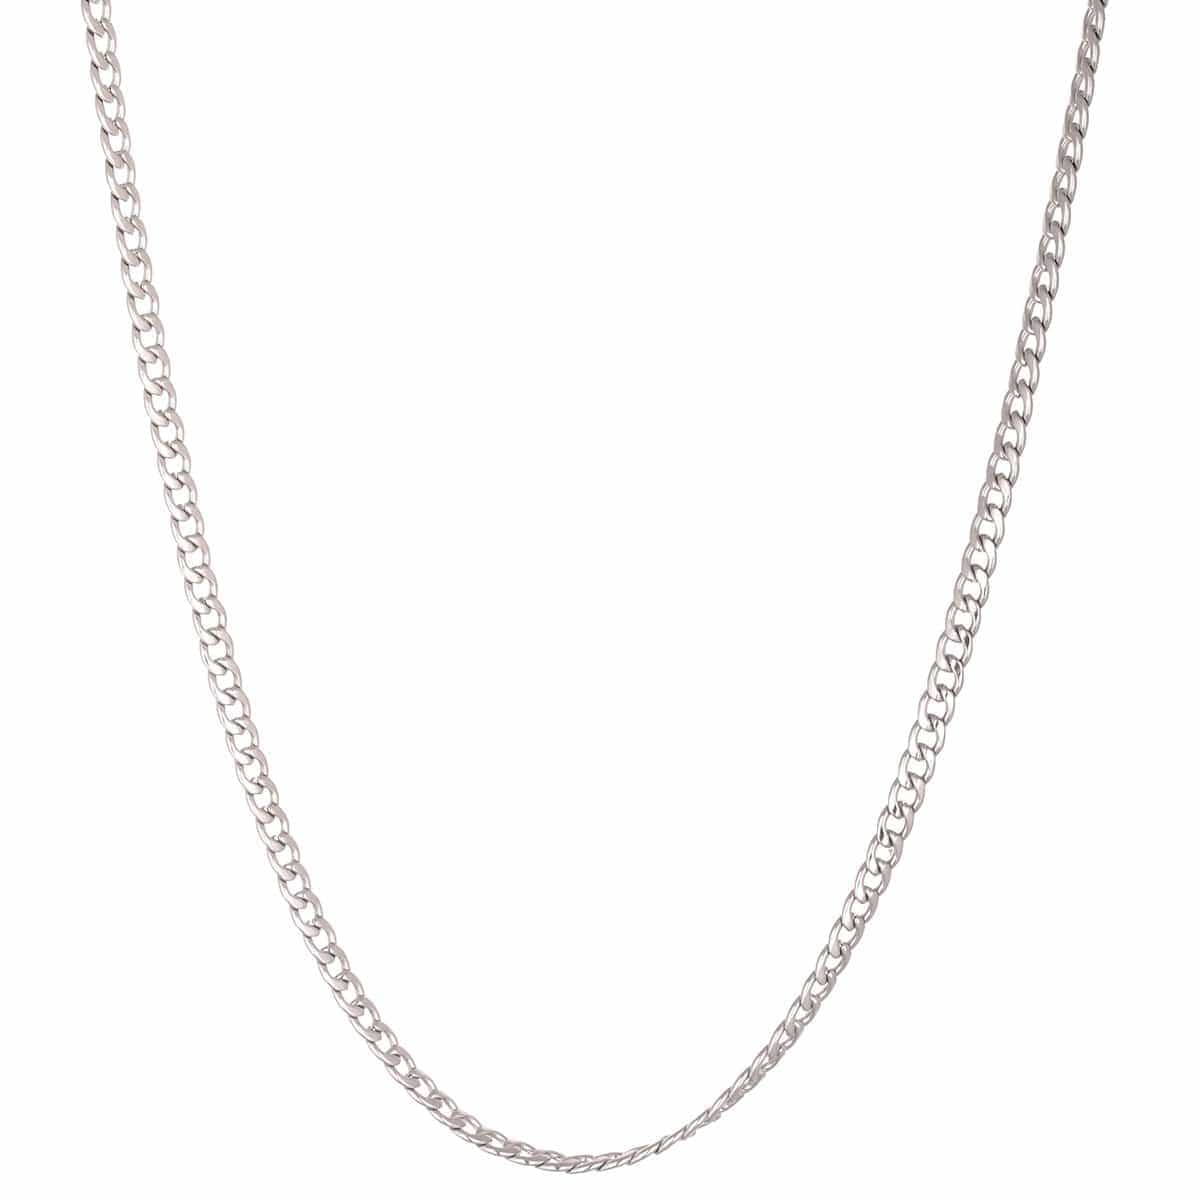 INOX JEWELRY Chains Silver Tone Stainless Steel 3.5 mm Flat Curb Polished Link Chain